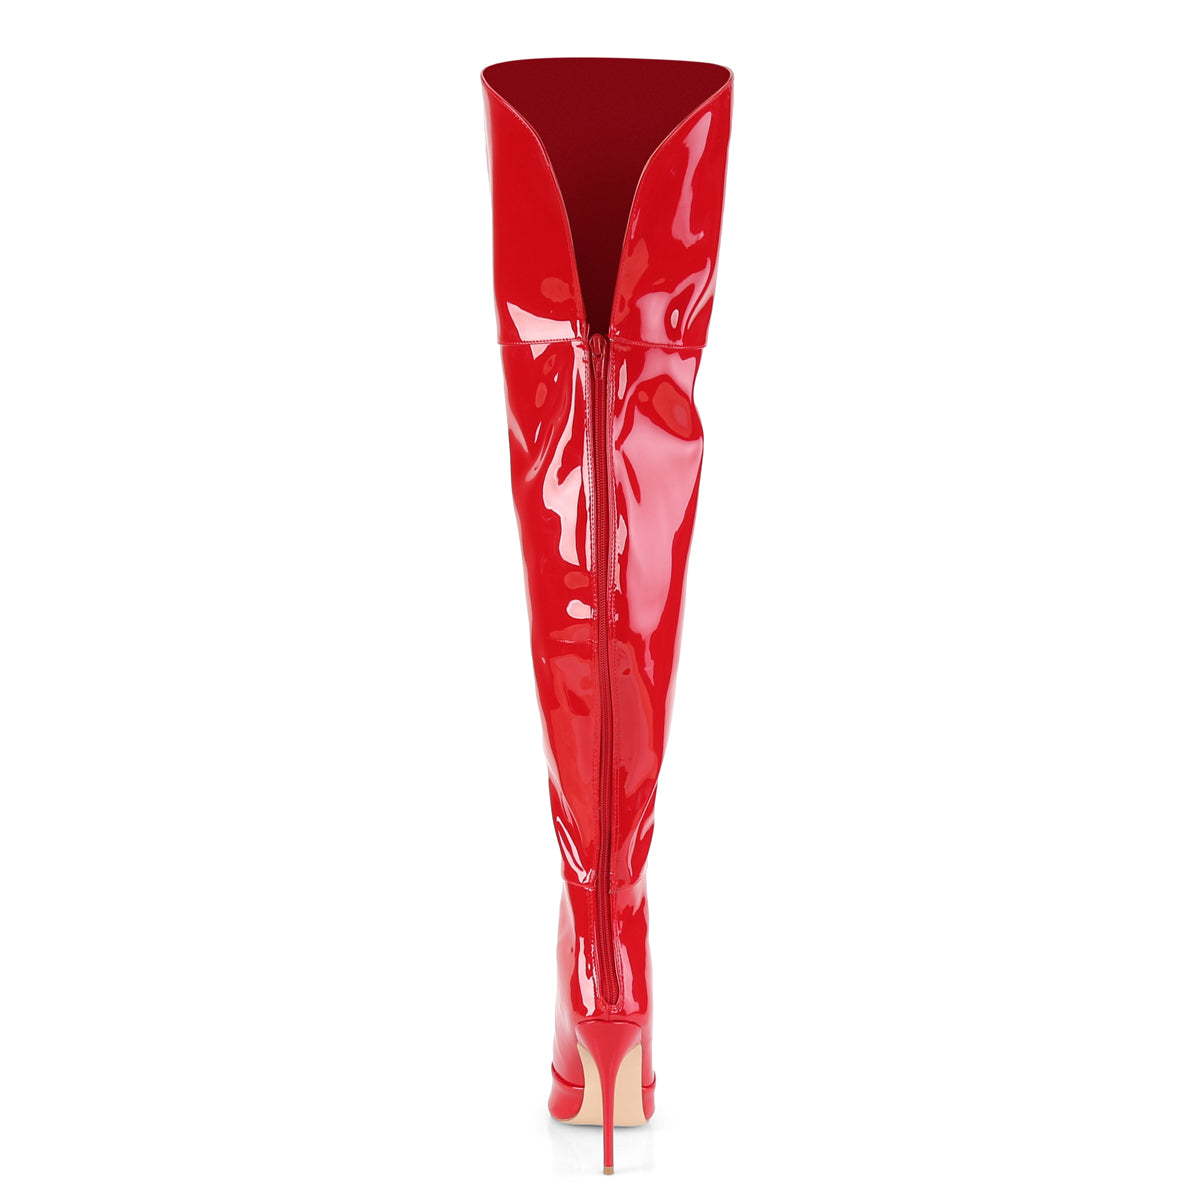 Pleaser Womens Boots COURTLY-3012 Red Patent